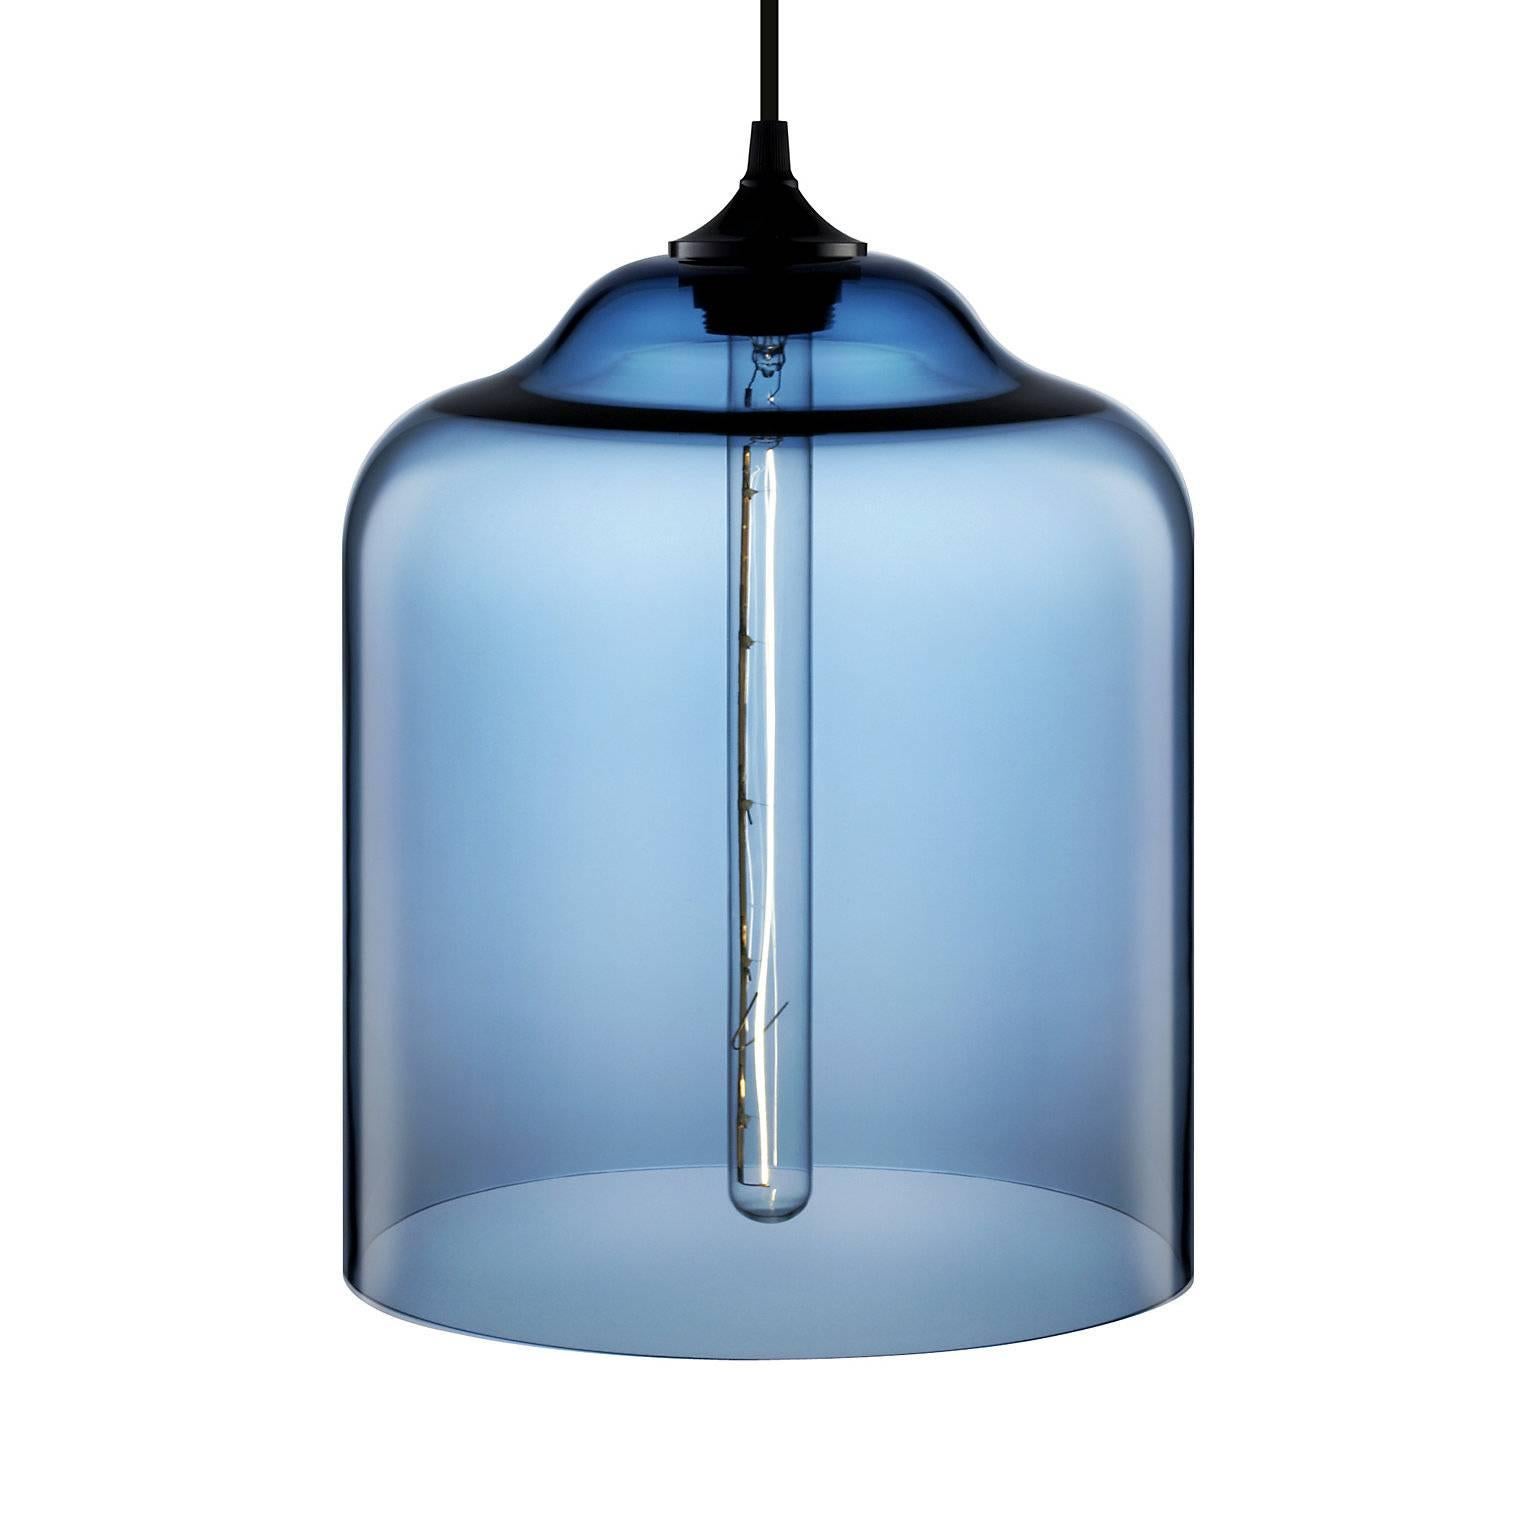 American Bell Jar Crystal Handblown Modern Glass Pendant Light, Made in the USA For Sale